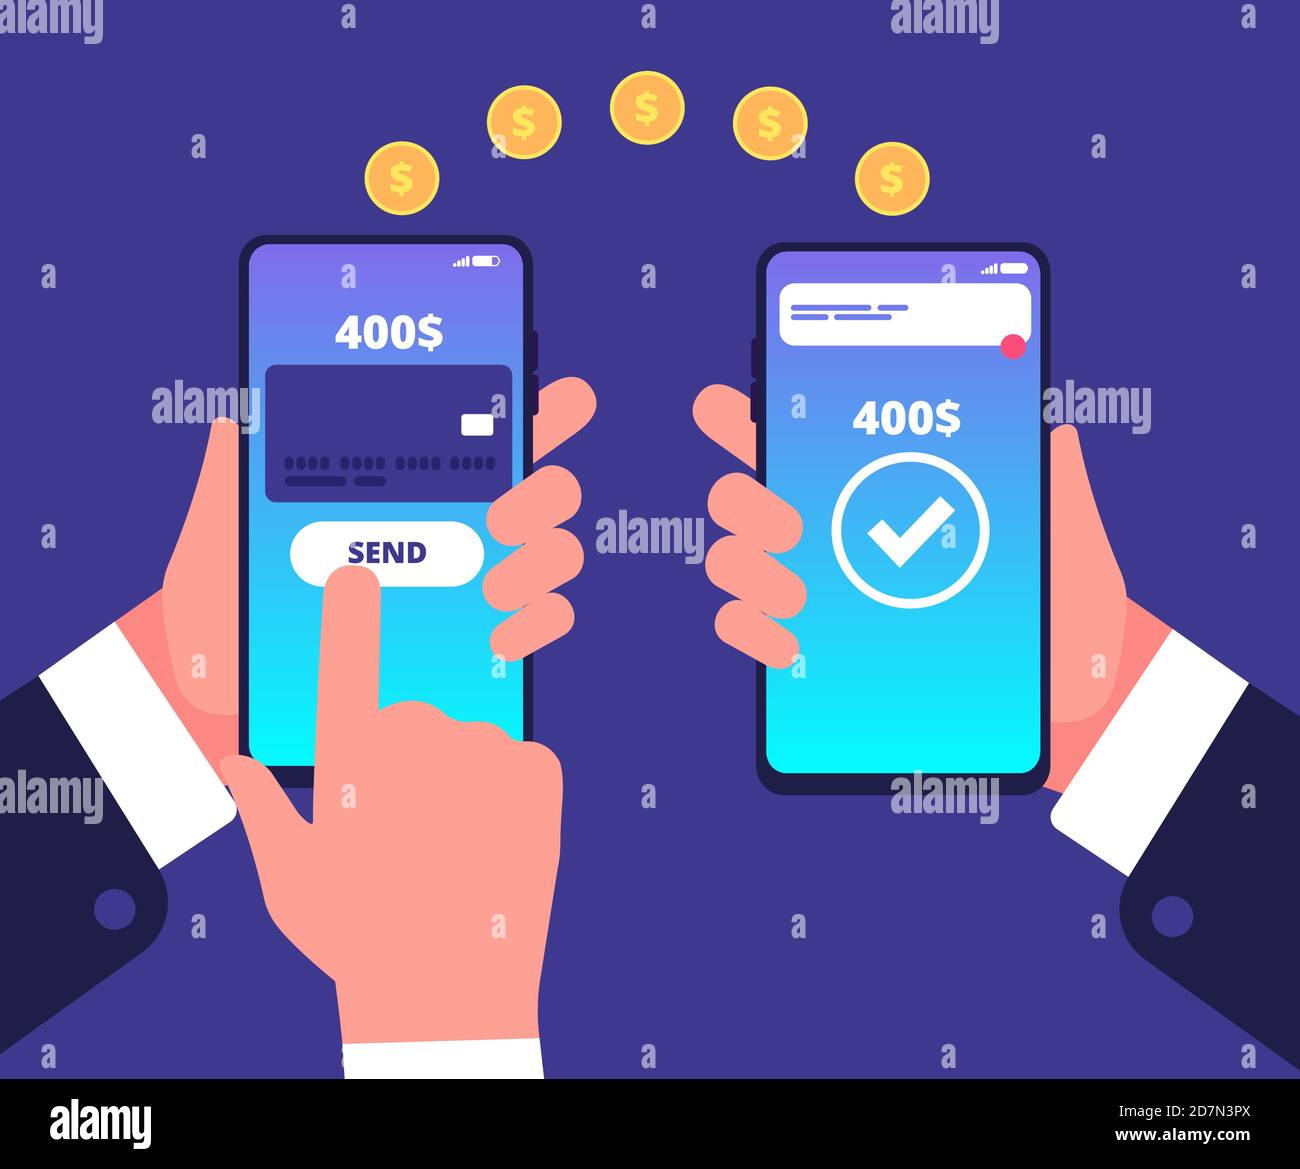 Online payment concept. Mobile transfers, wireless money payments with smartphone. Smart wallet vector background. Illustration of transfer payment, banking wallet online Stock Vector